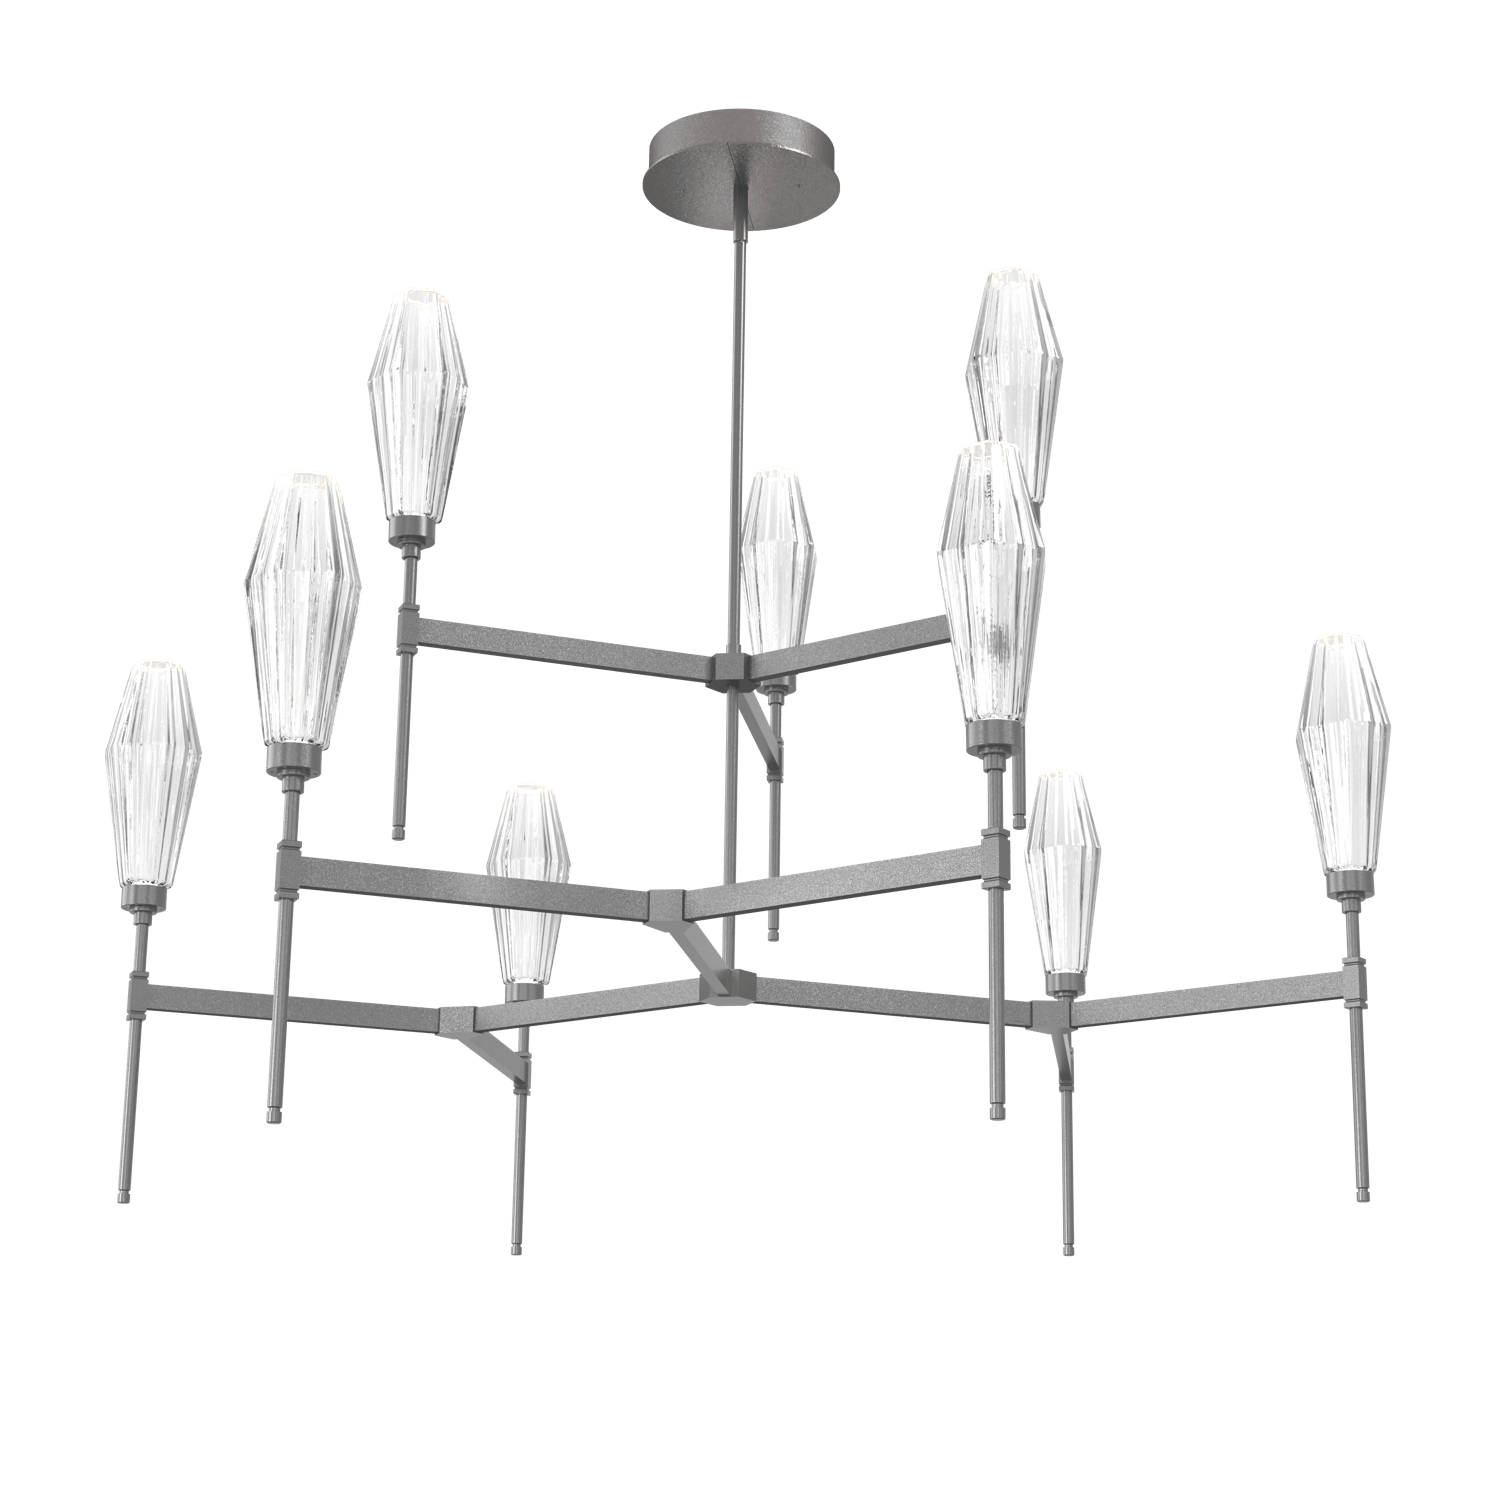 CHB0049-54-GP-RC-Hammerton-Studio-Aalto-54-inch-round-two-tier-belvedere-chandelier-with-graphite-finish-and-optic-ribbed-clear-glass-shades-and-LED-lamping